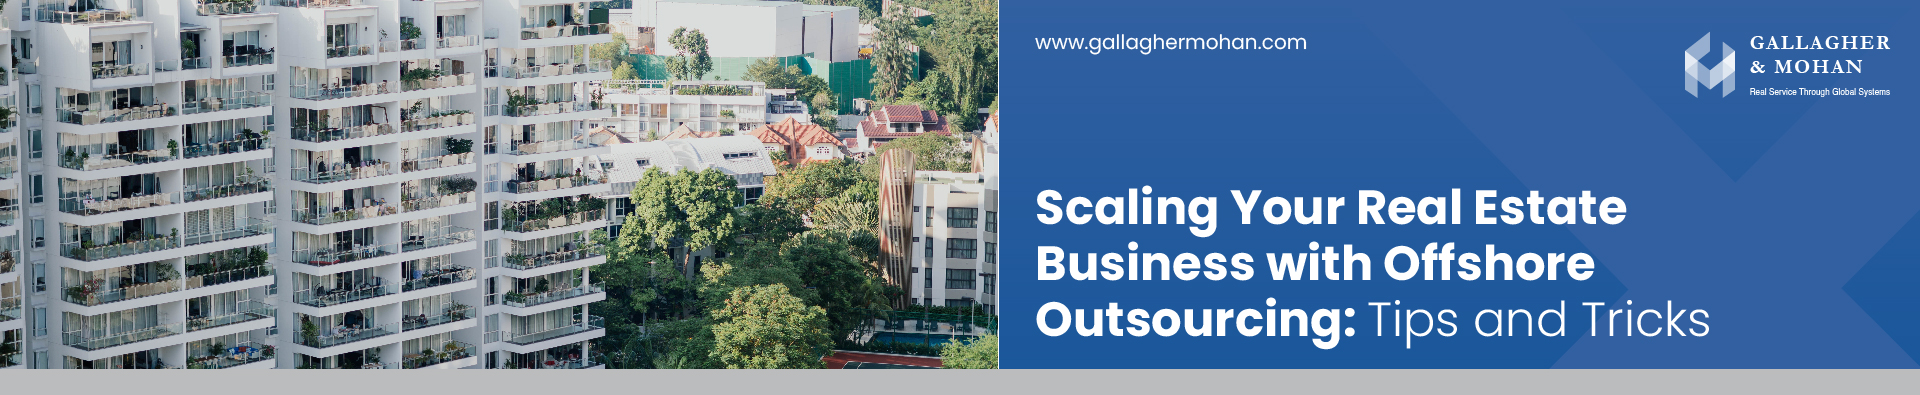 Scaling Your Real Estate Business With Offshore Outsourcing Tips And Tricks